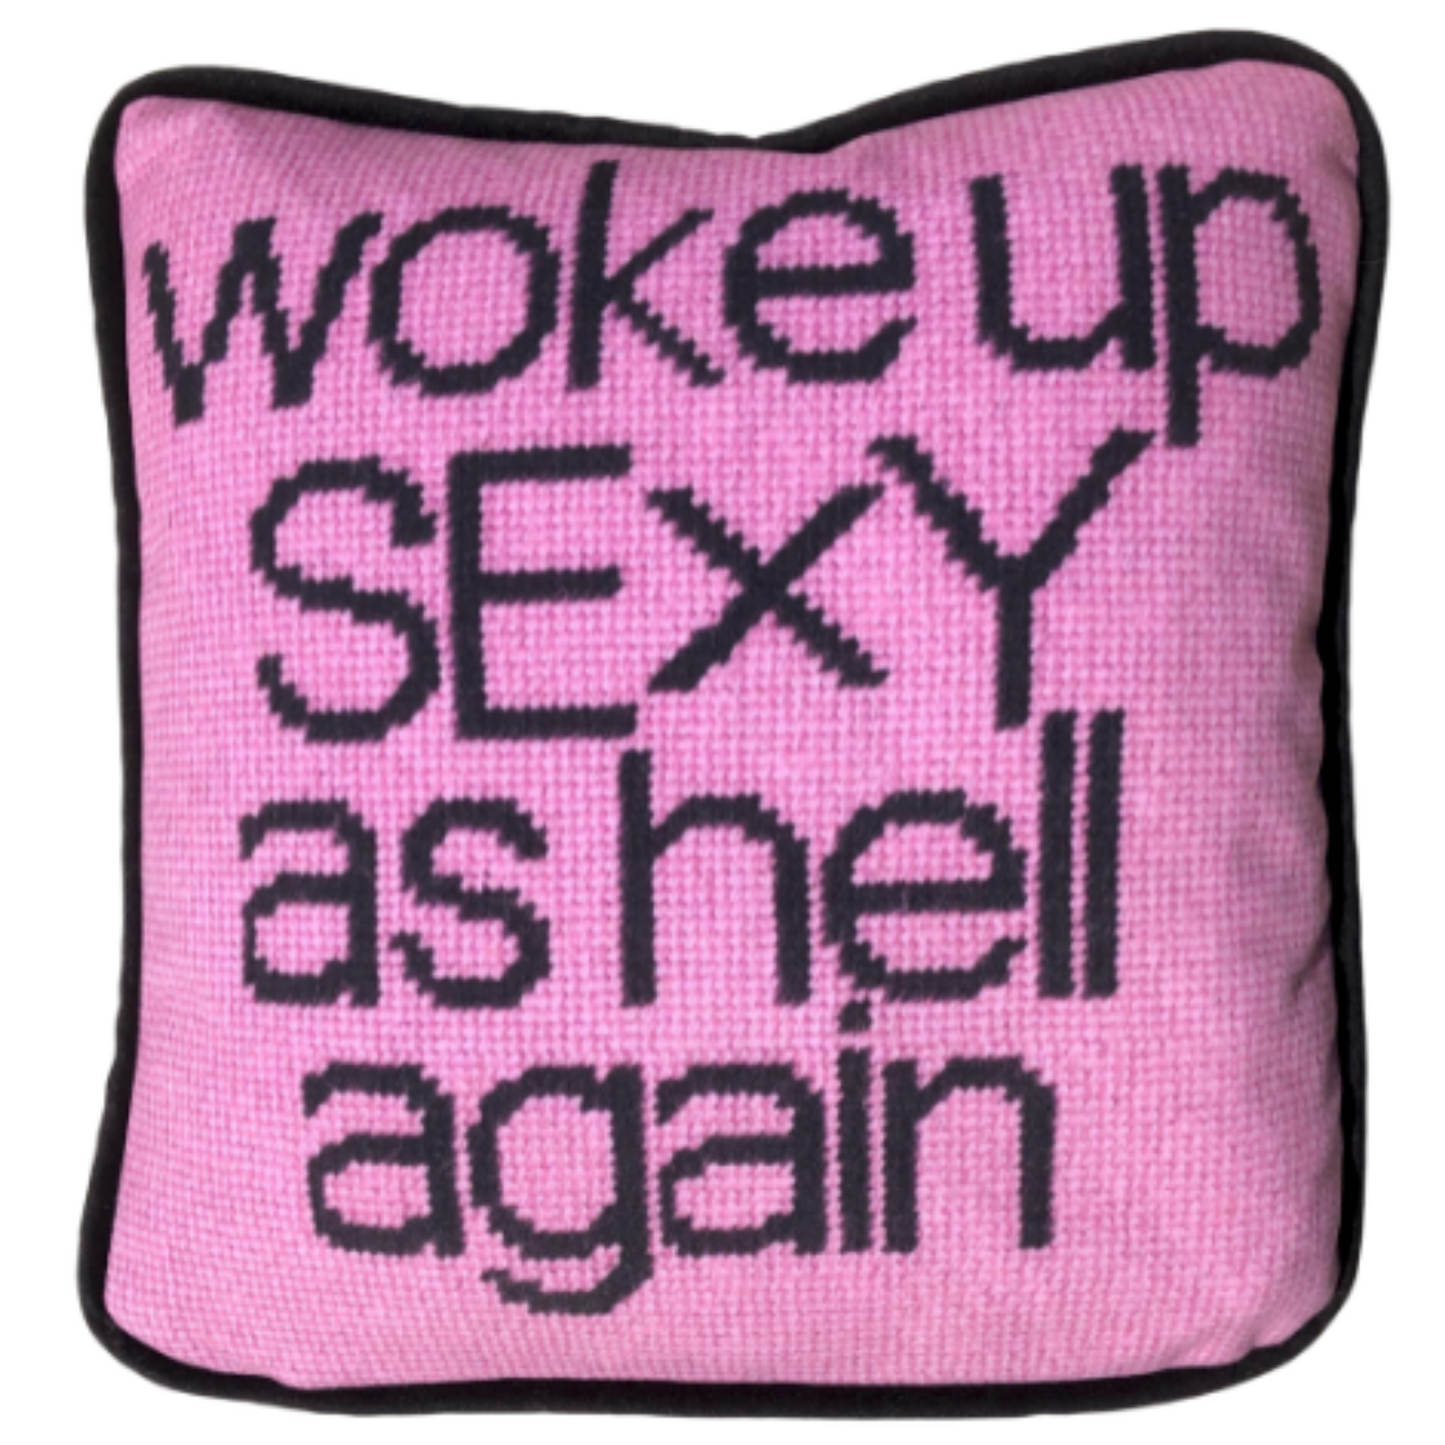 woke up sexy as hell in black, centered on pillow with pink background